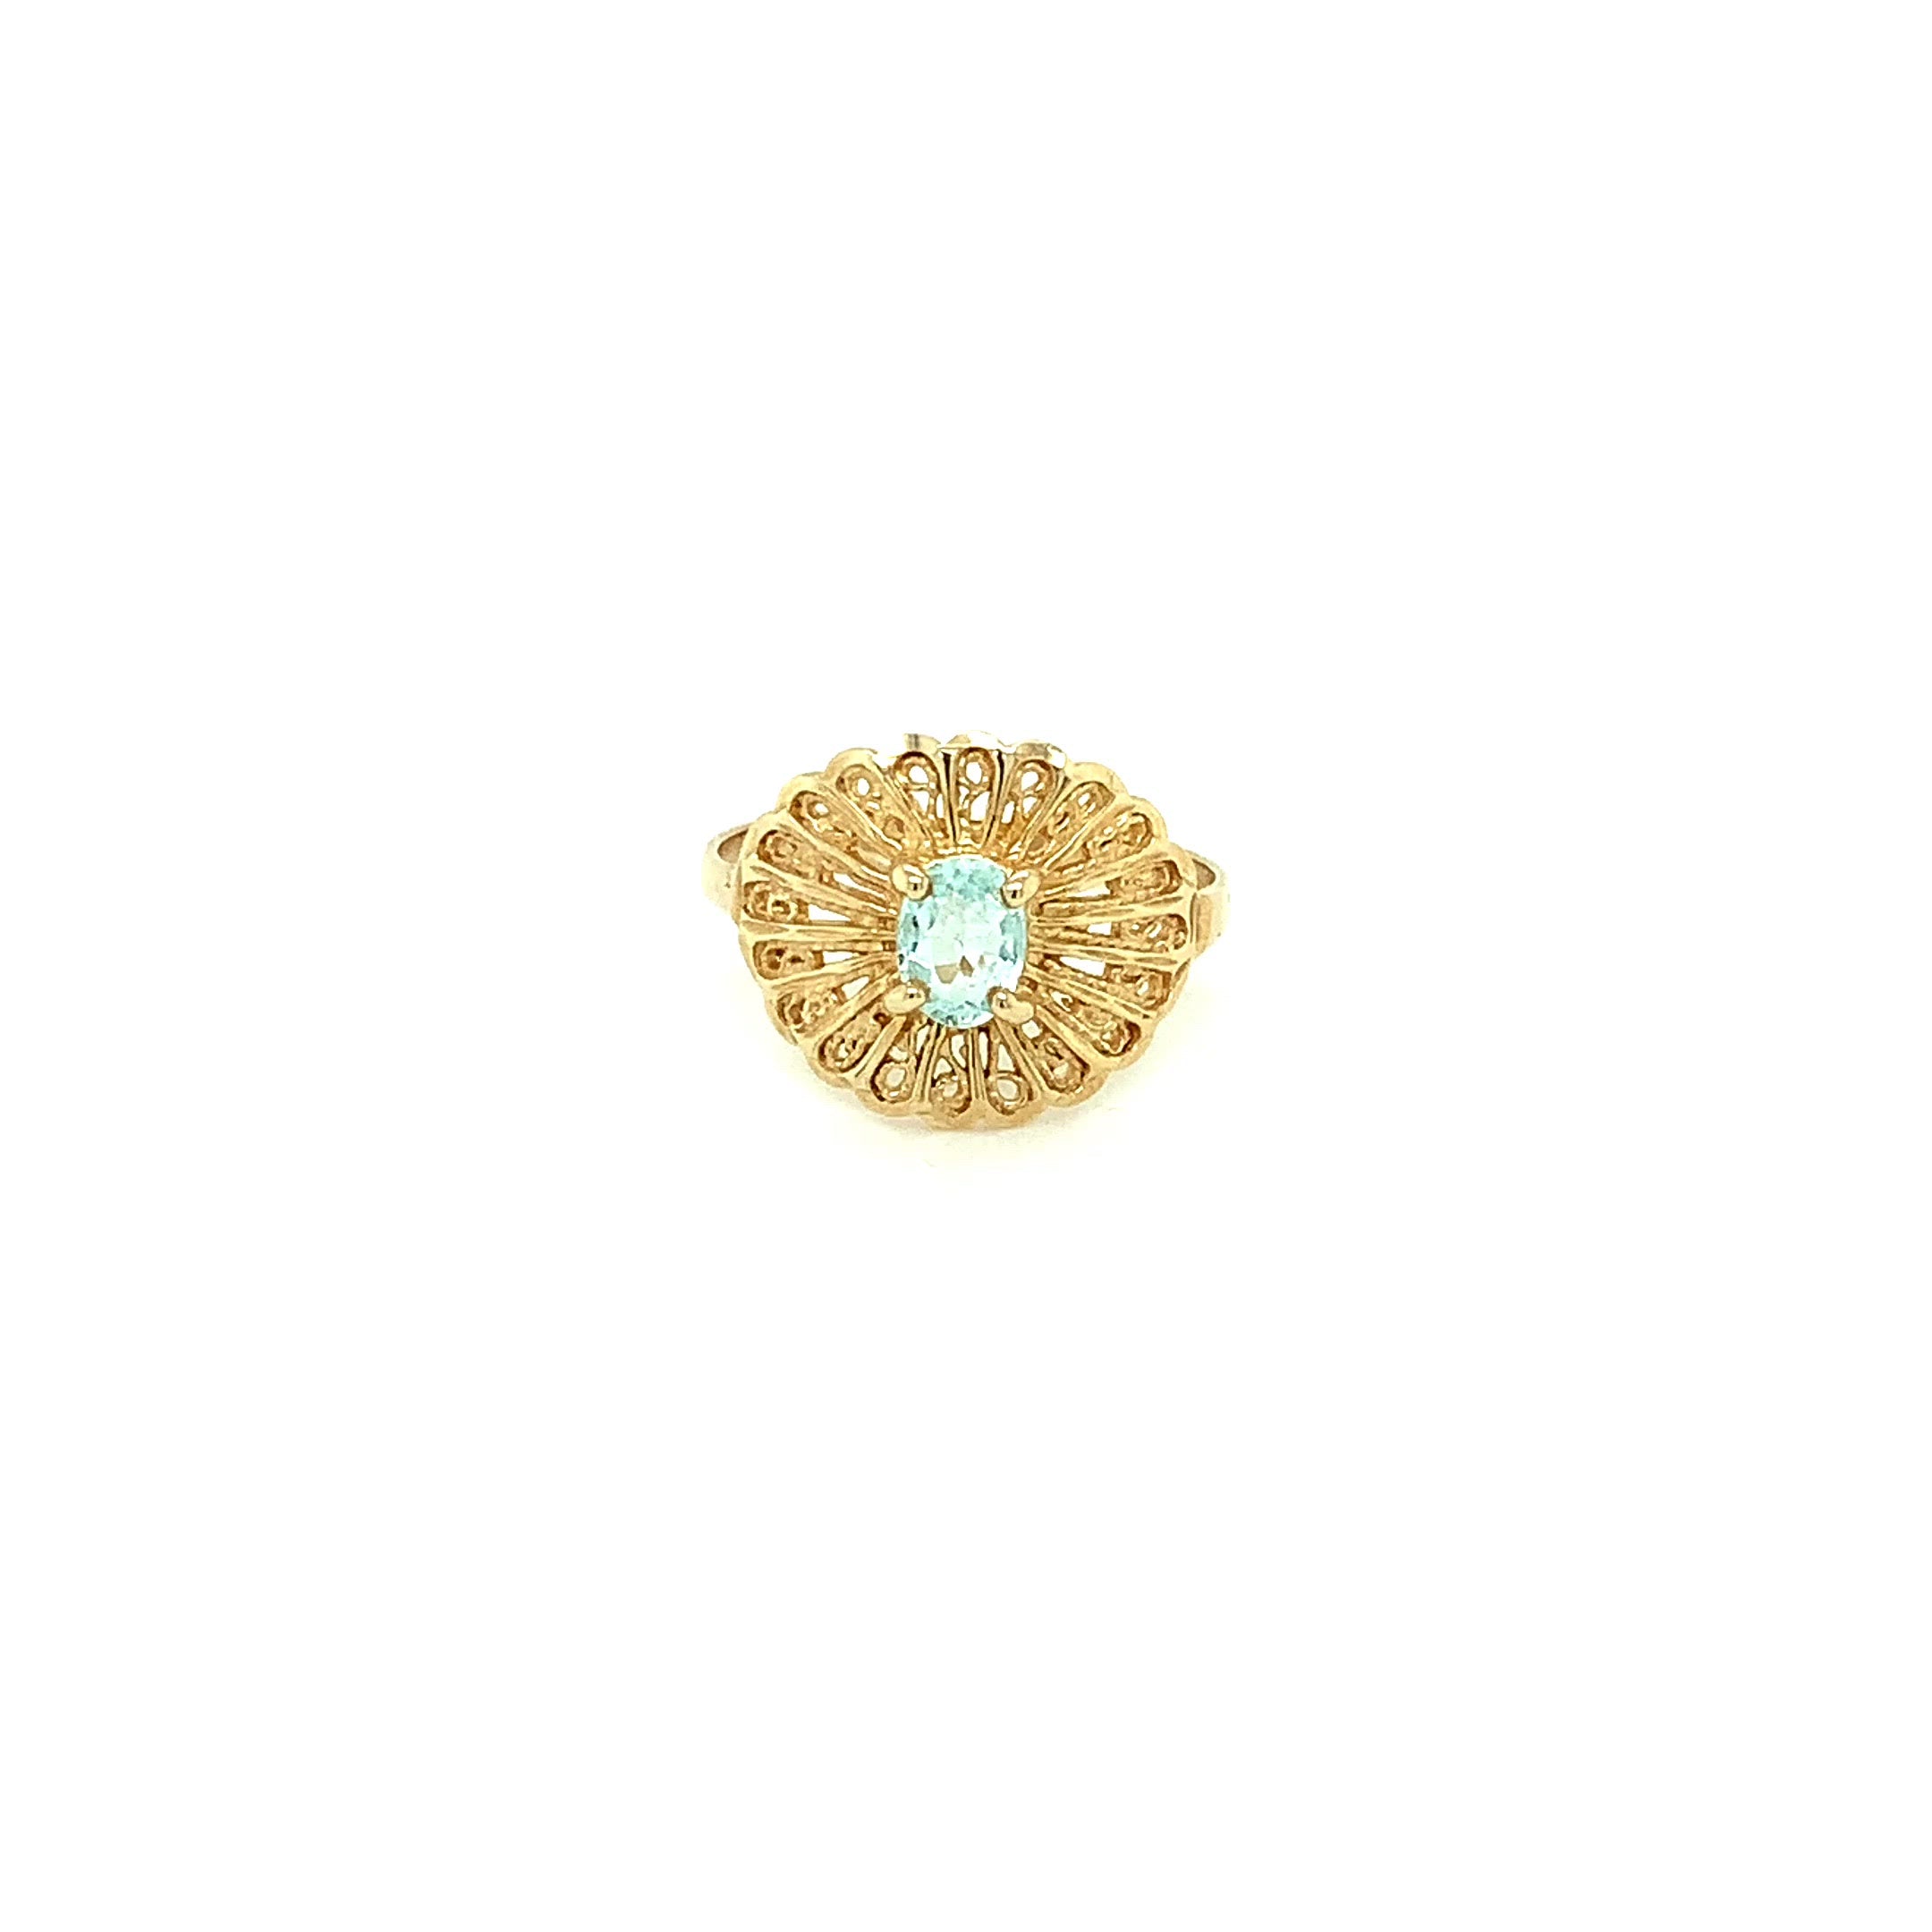 Natural Paraiba Tourmaline Ring 10K Solid Gold .50ct Solitaire Gemstone Saucer Ring Ballerina Ring Women's Ring Birthstone Jewelry Jewellery